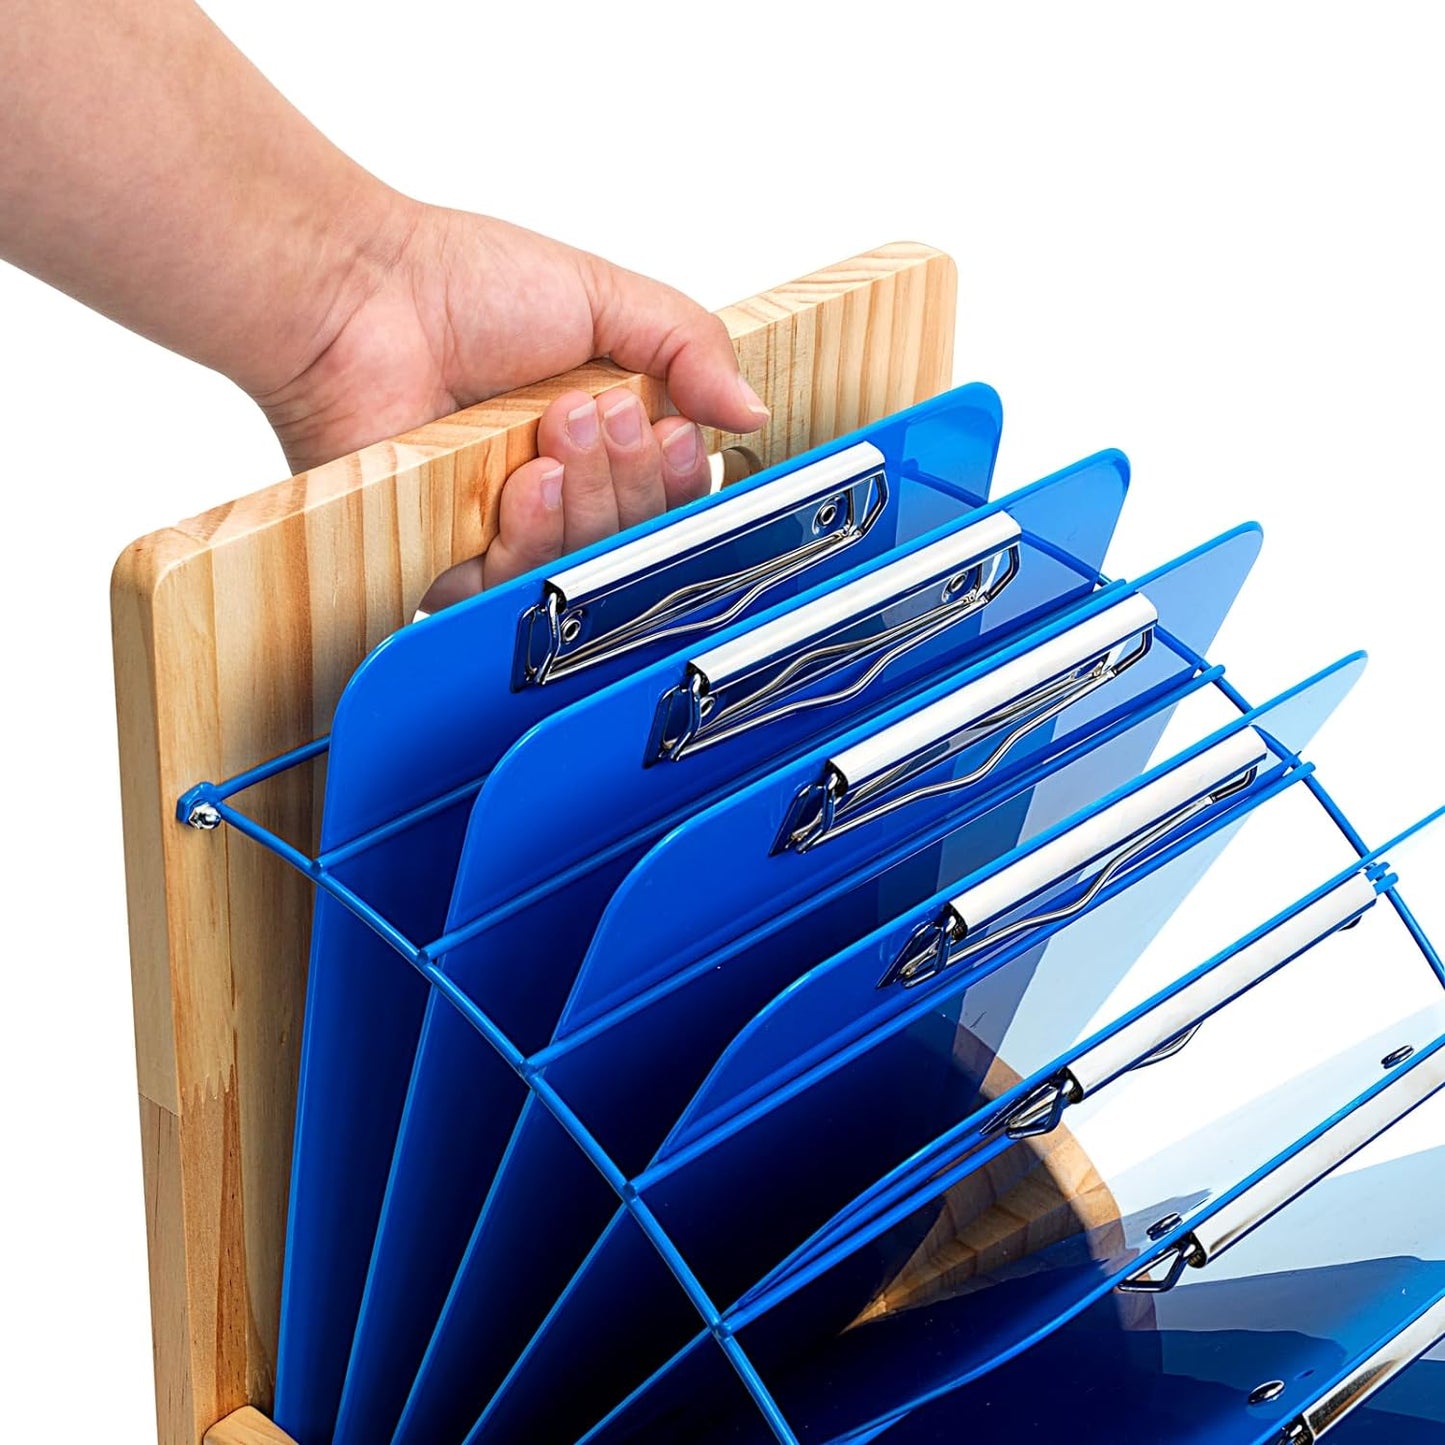 Store More Clipboard Stand - Organizational Tool, Easy Assembly, Sturdy Clipboard Holder - Teacher Supplies, Home Office Storage